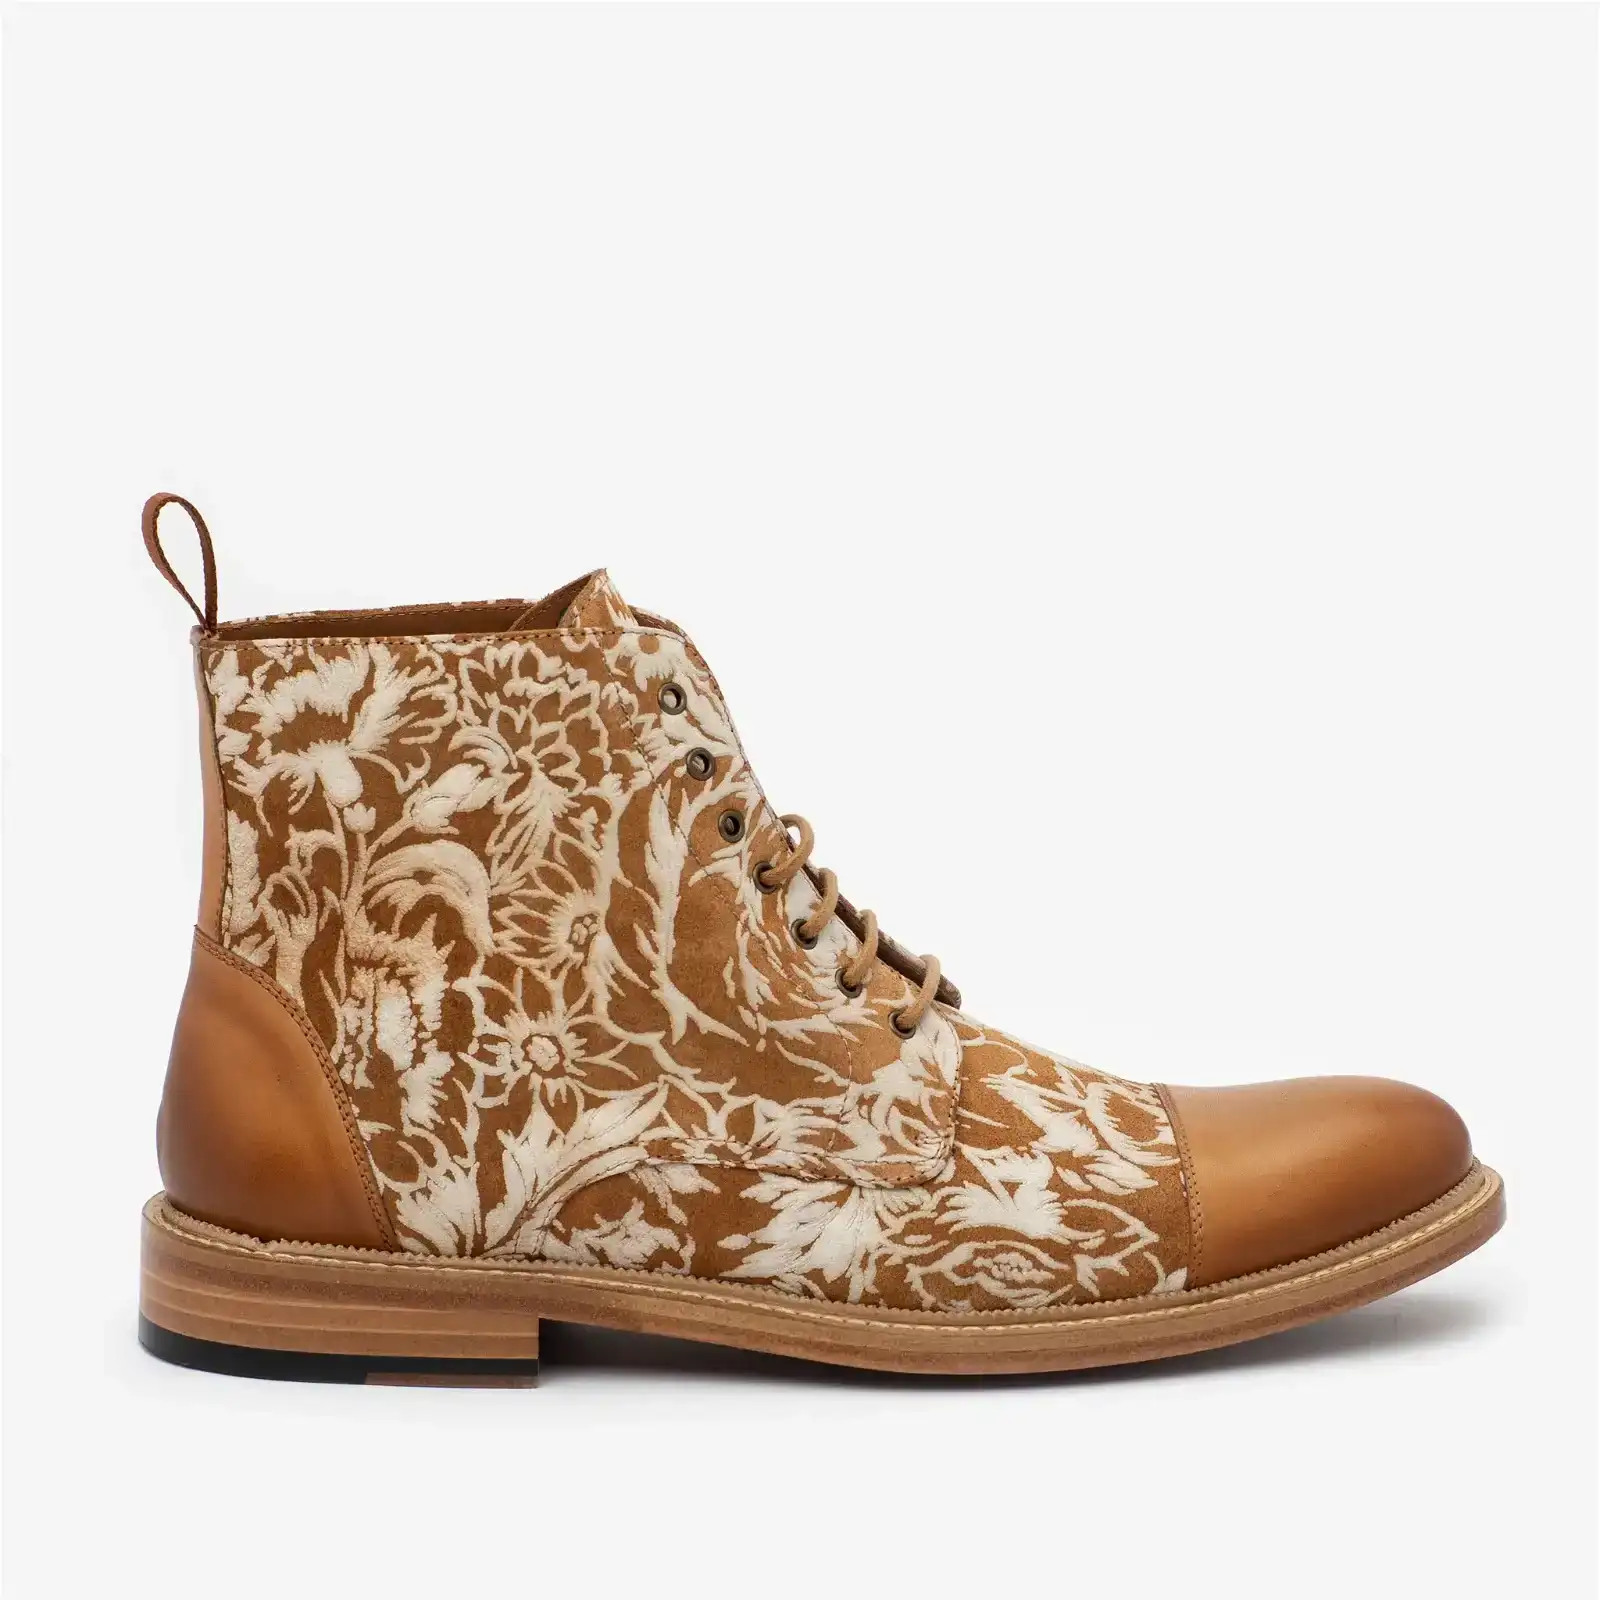 Image of The Rome Boot in Floral